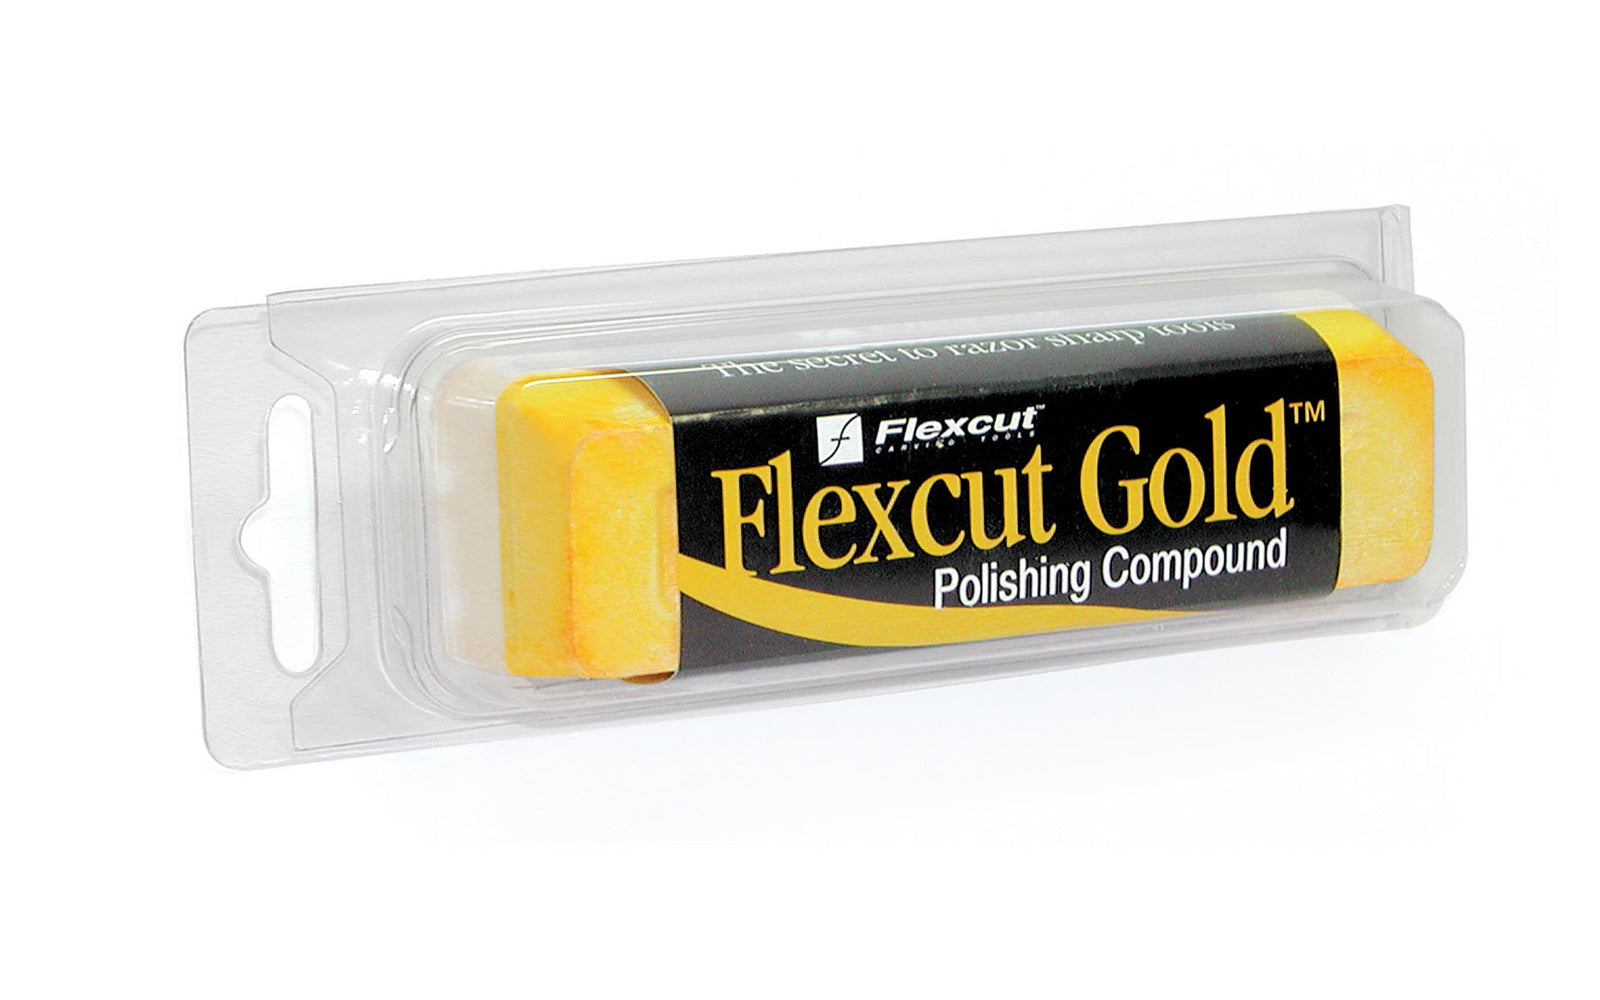 Flexcut Gold Polishing Compound ~ PW11 - Blend of aluminum & titanium oxide provides a balance between aggressive removal of hardened tool steels - Excellent for helping to get that razor sharp edge on carving tools - Helps produce a bright mirror-like polished edge